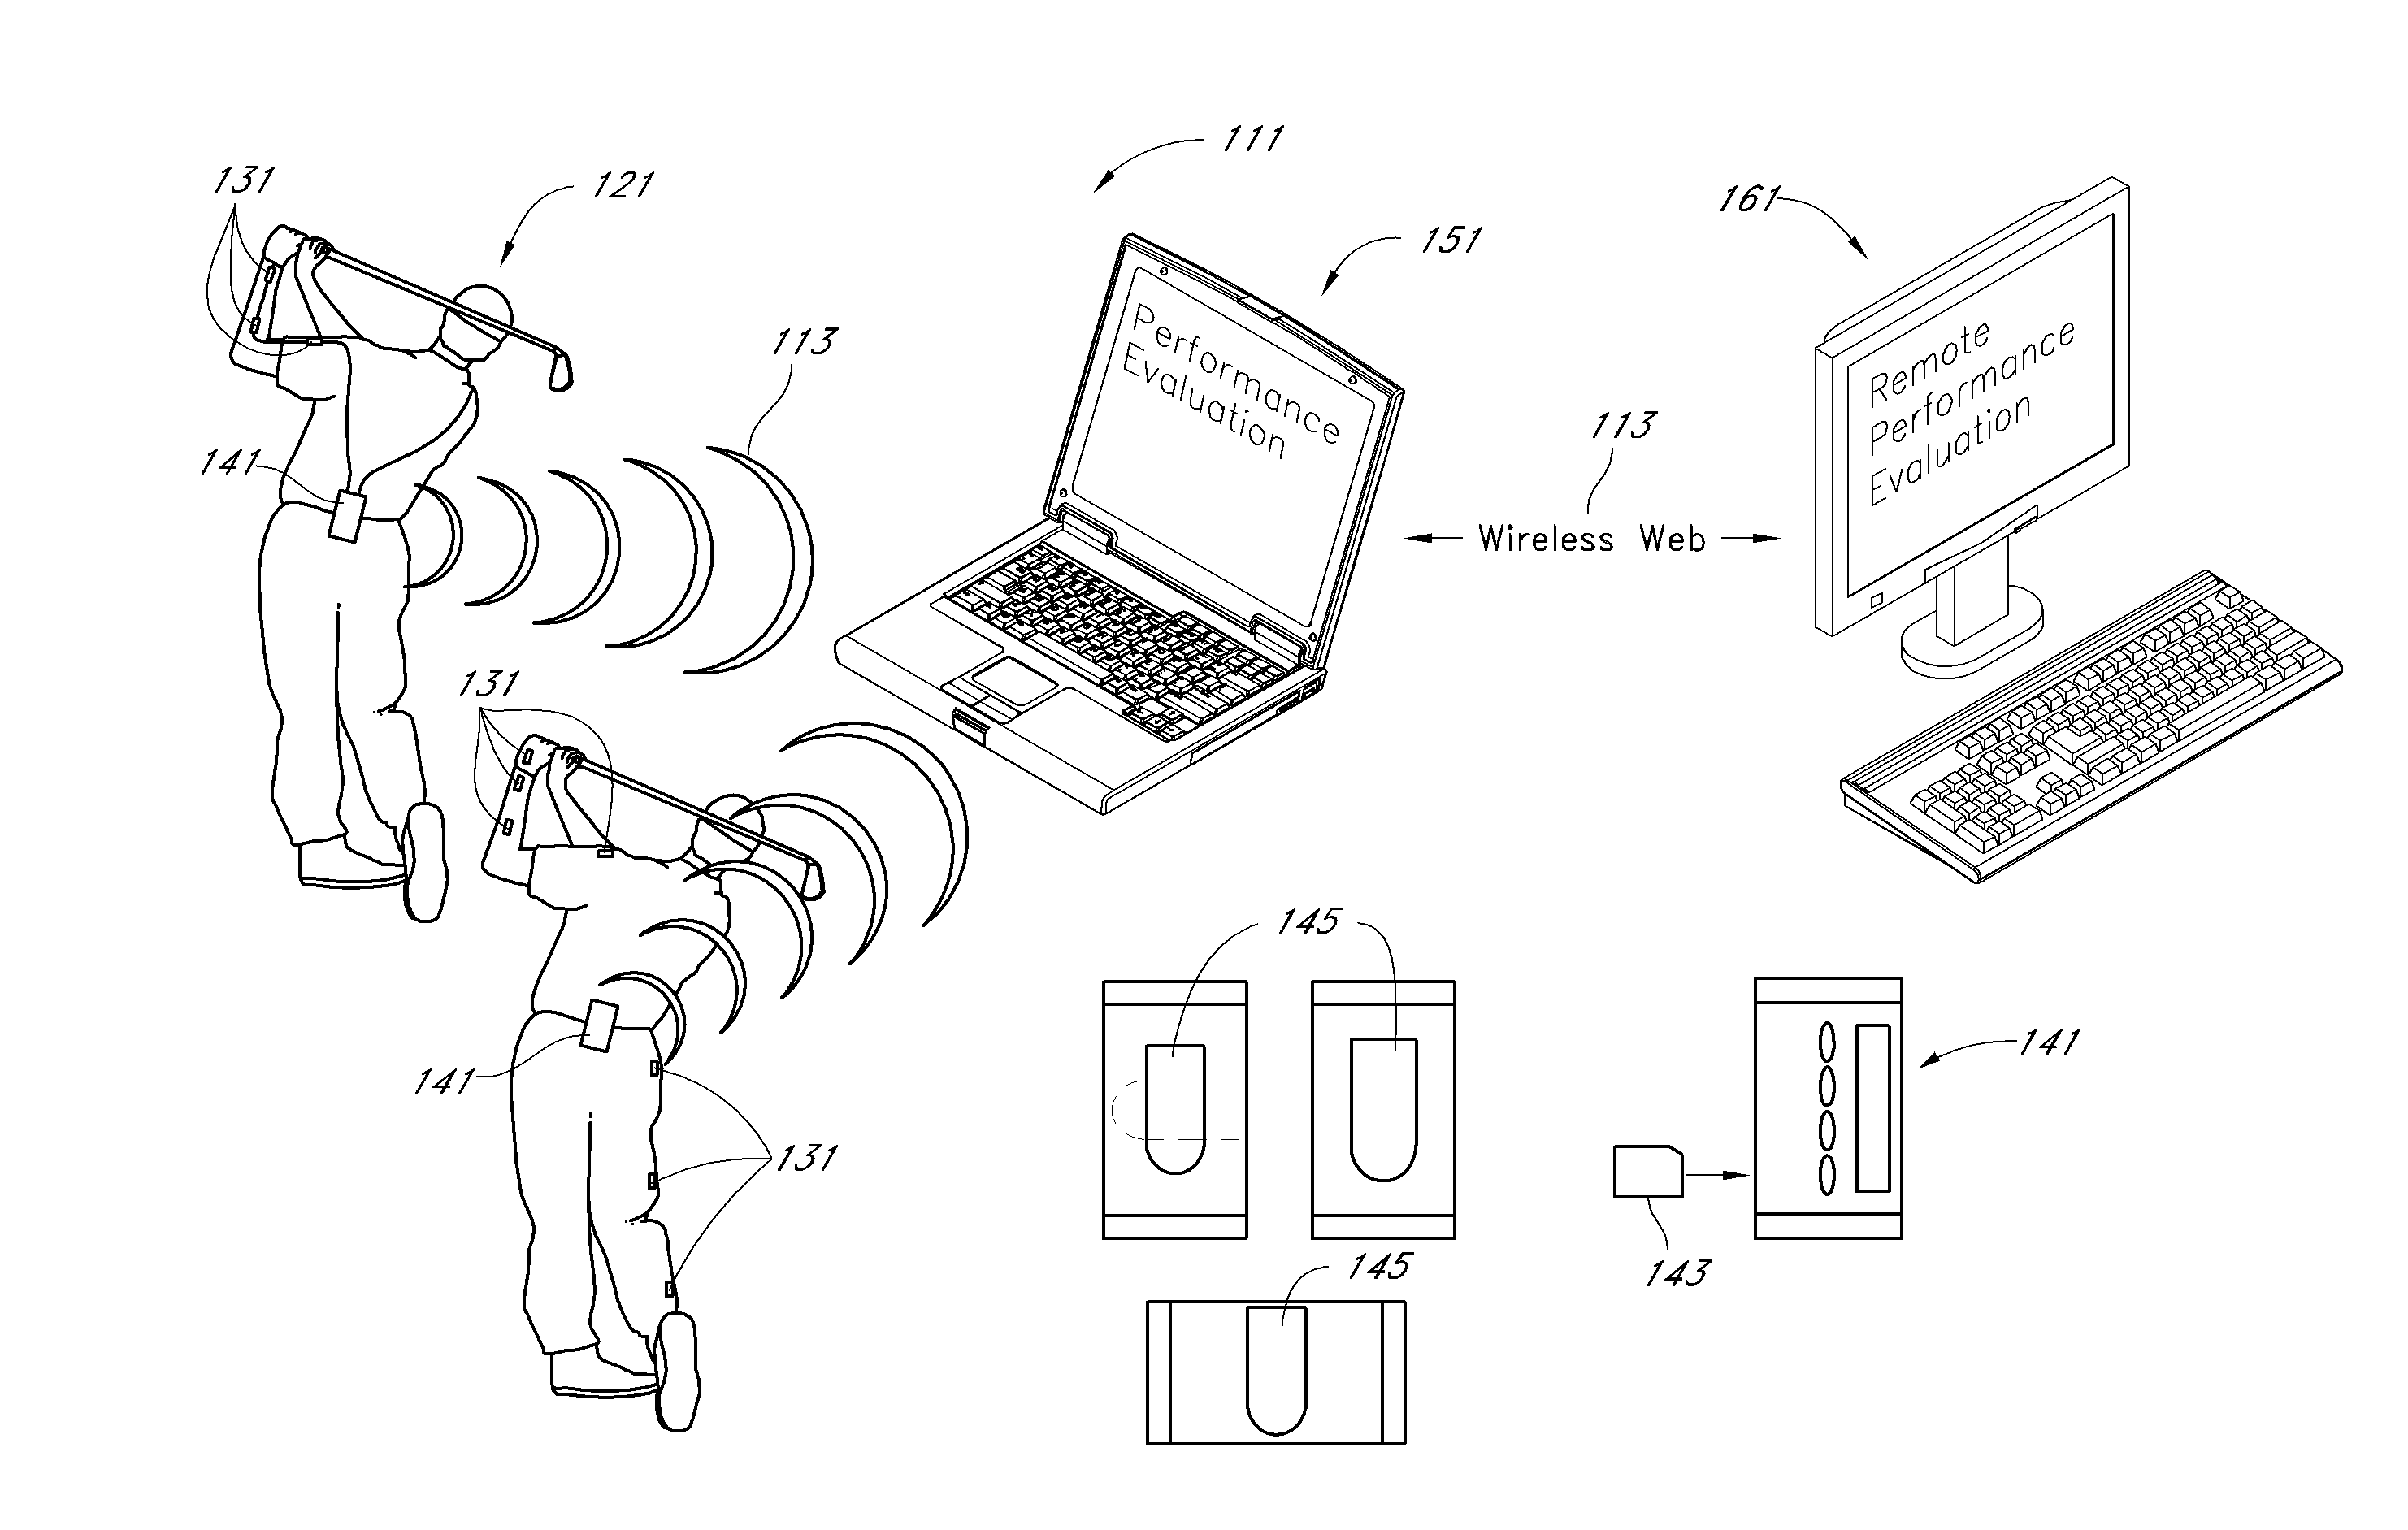 Apparatus, systems, and methods for gathering and processing biometric and biomechanical data